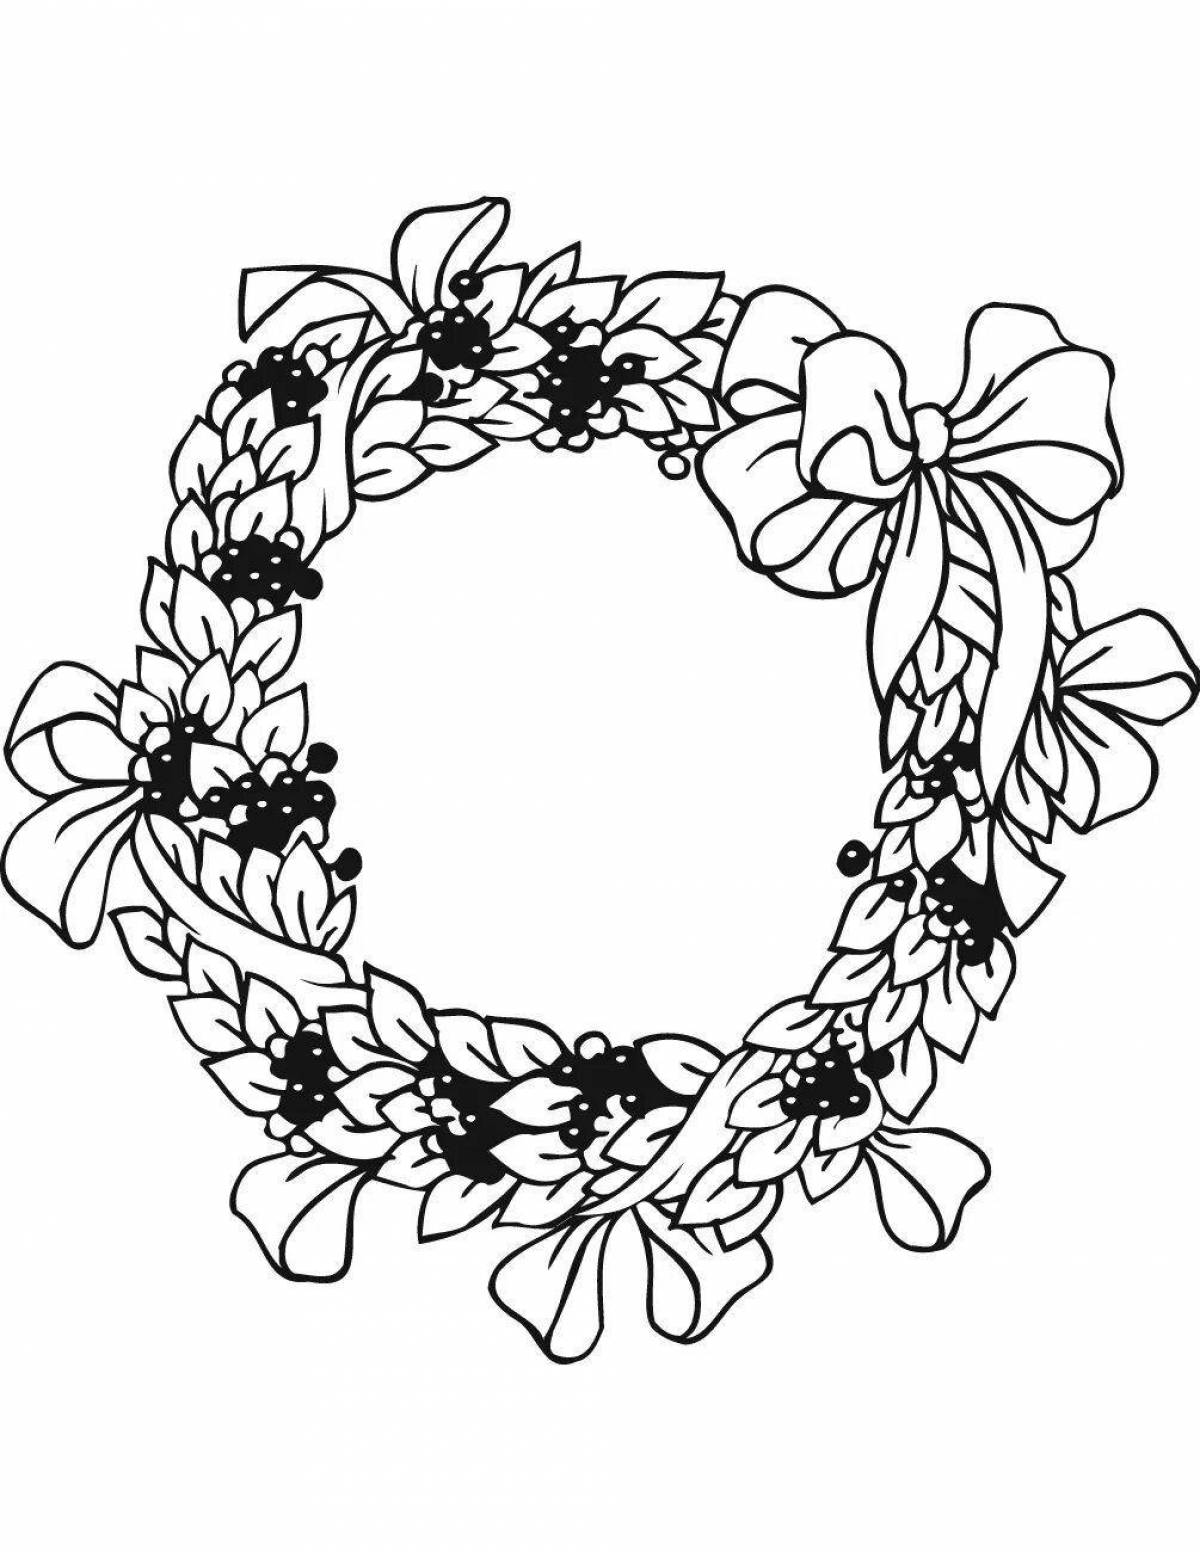 Coloring book exotic wreath of flowers